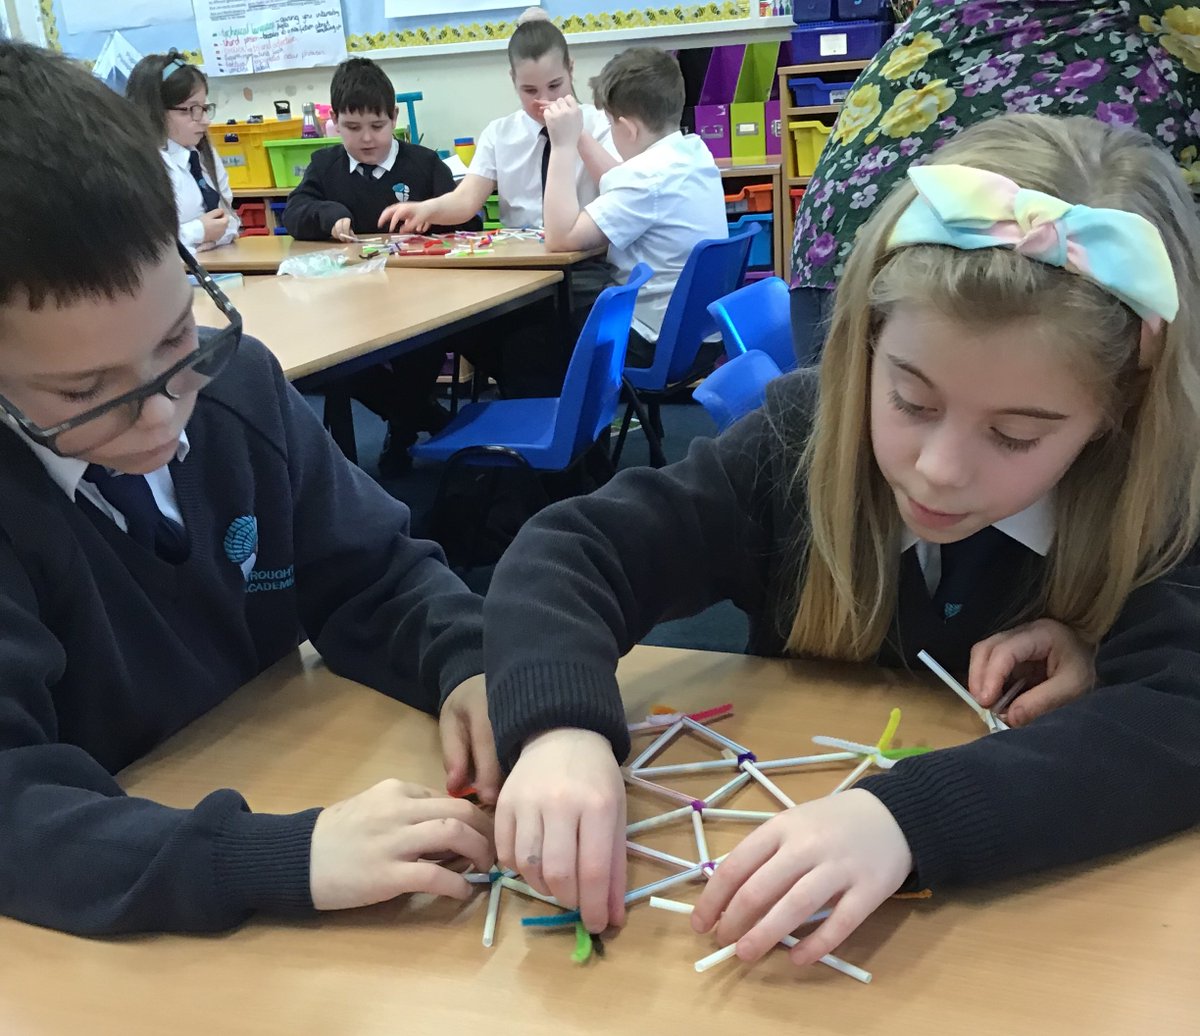 Our Year 4 pupils were fascinated by geodesic domes in their Design & Technology lesson #cuspcurriculum #creativeeducationtrust